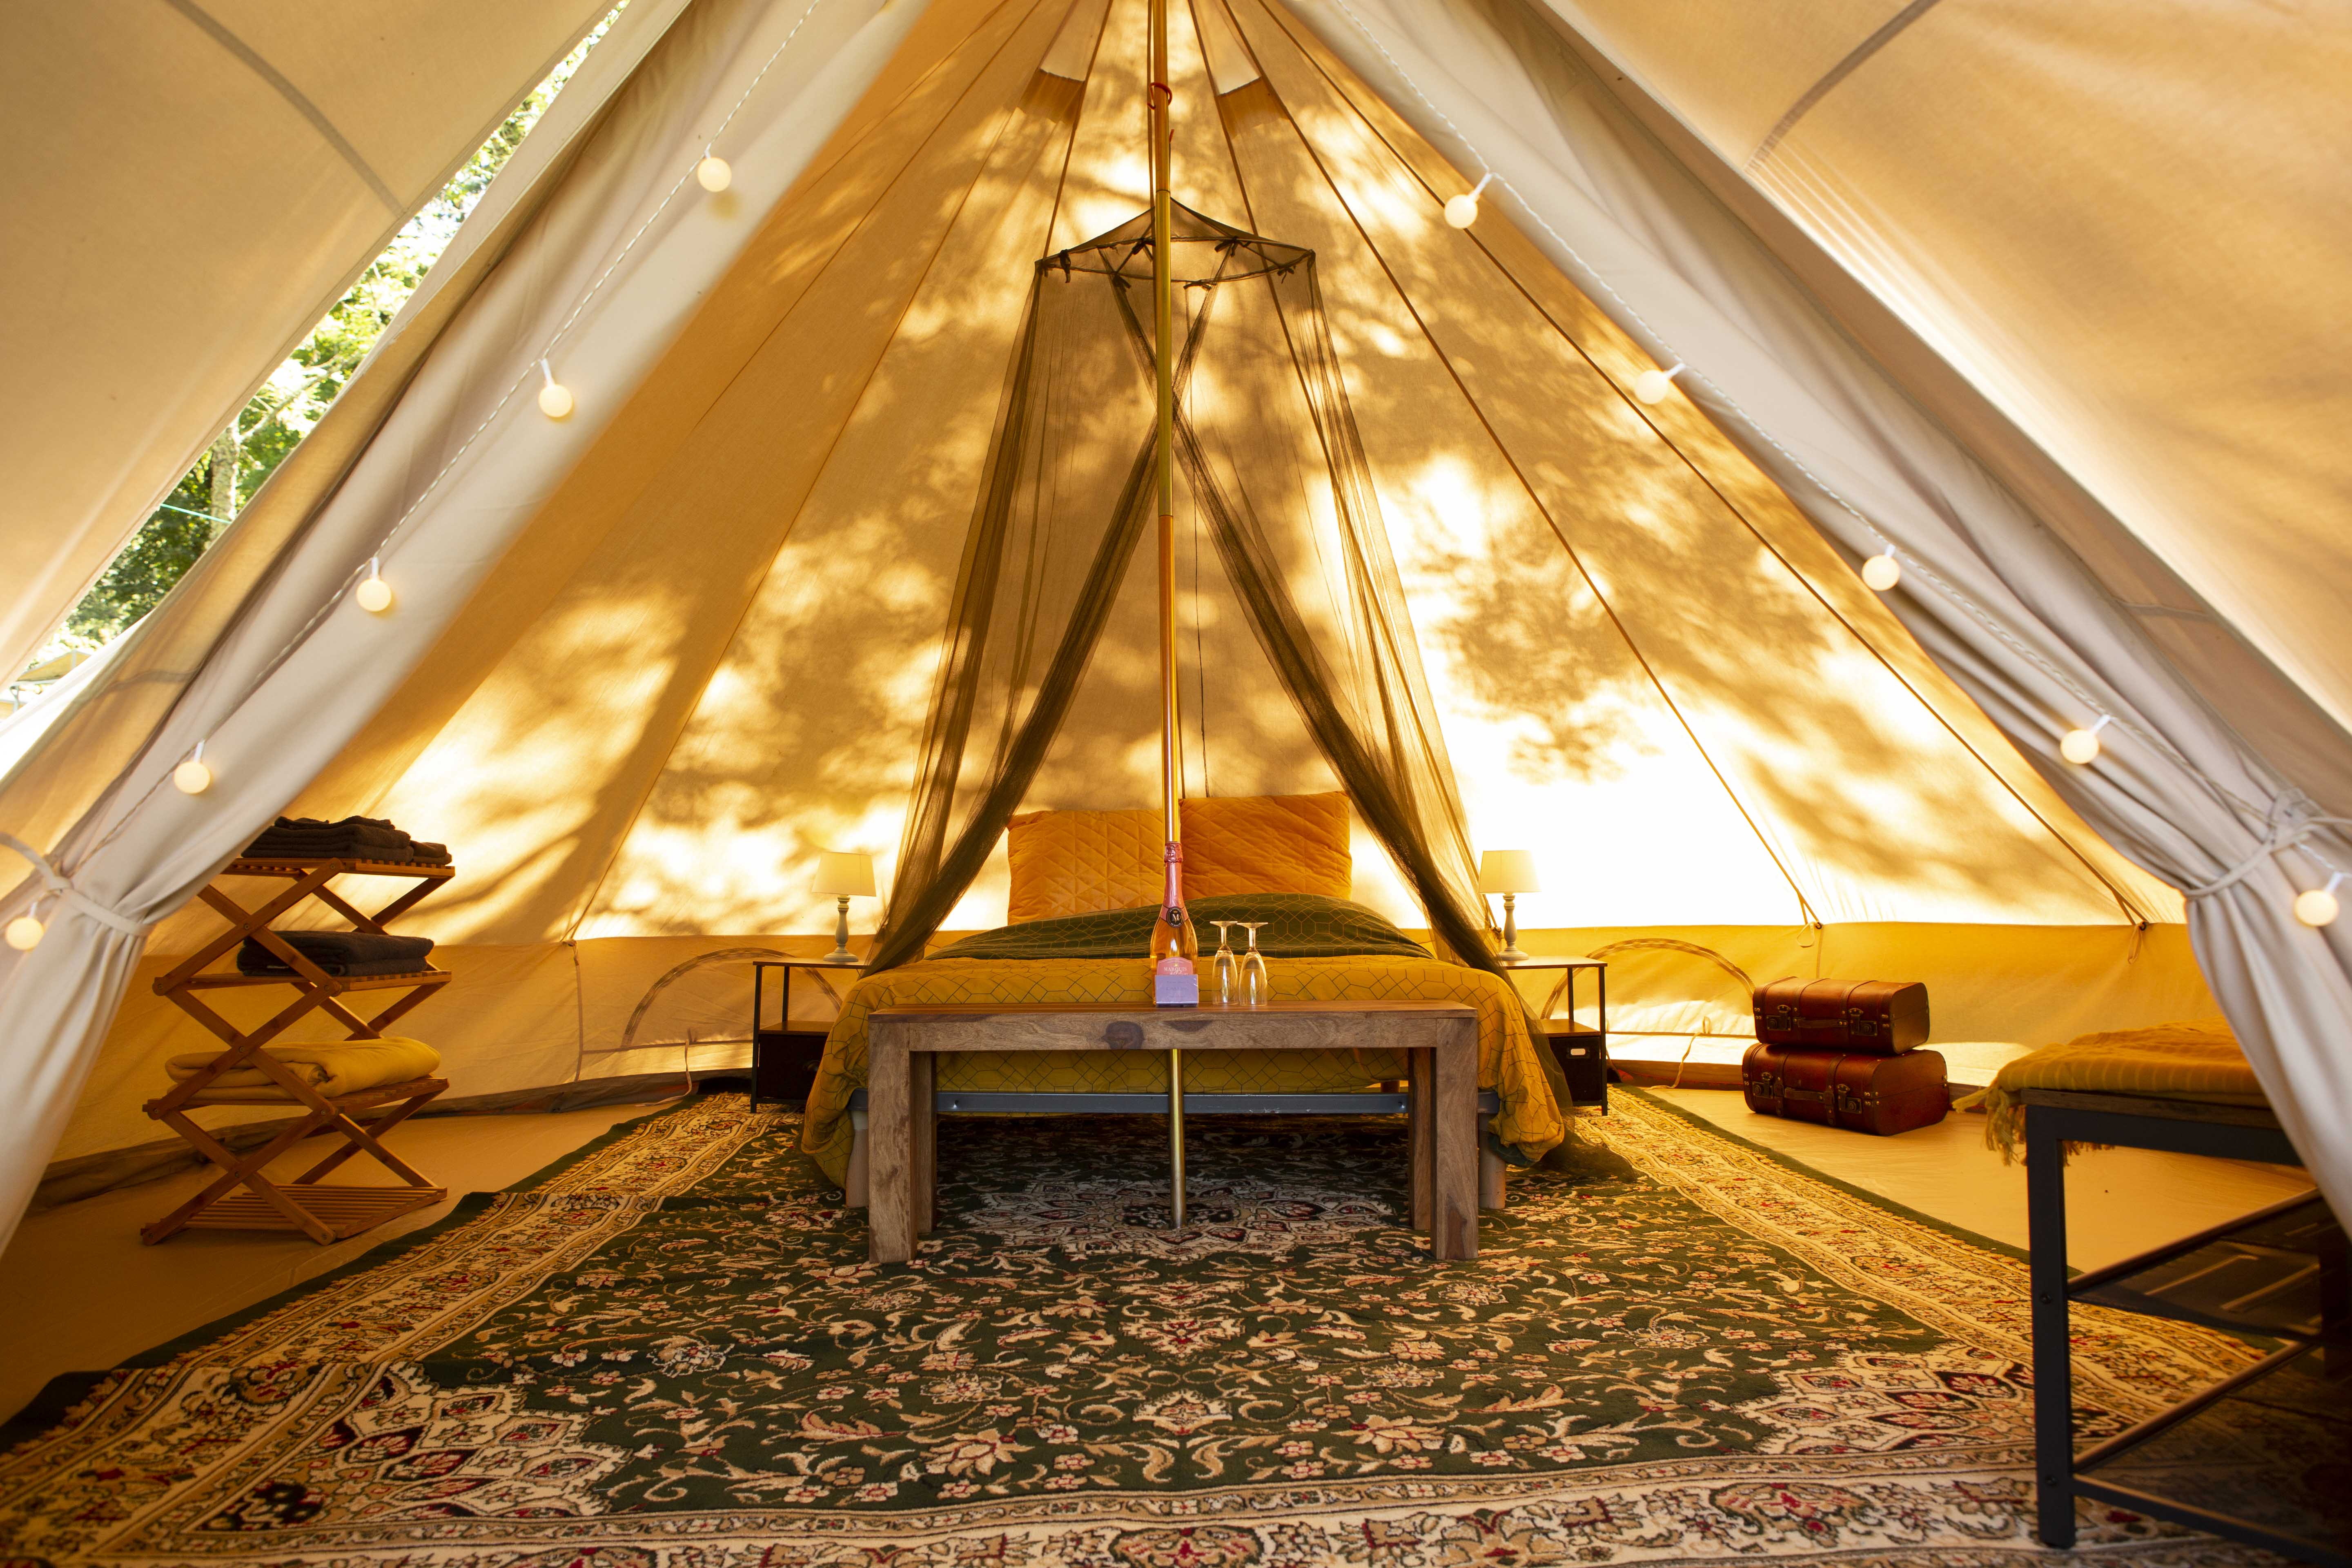 Accommodation - Two Bell Tents, 6 Pers (2+4) Approx. 40M2, (2X20) High 3 M. Right At The River Lot - CAMPING LE CLOS BOUYSSAC